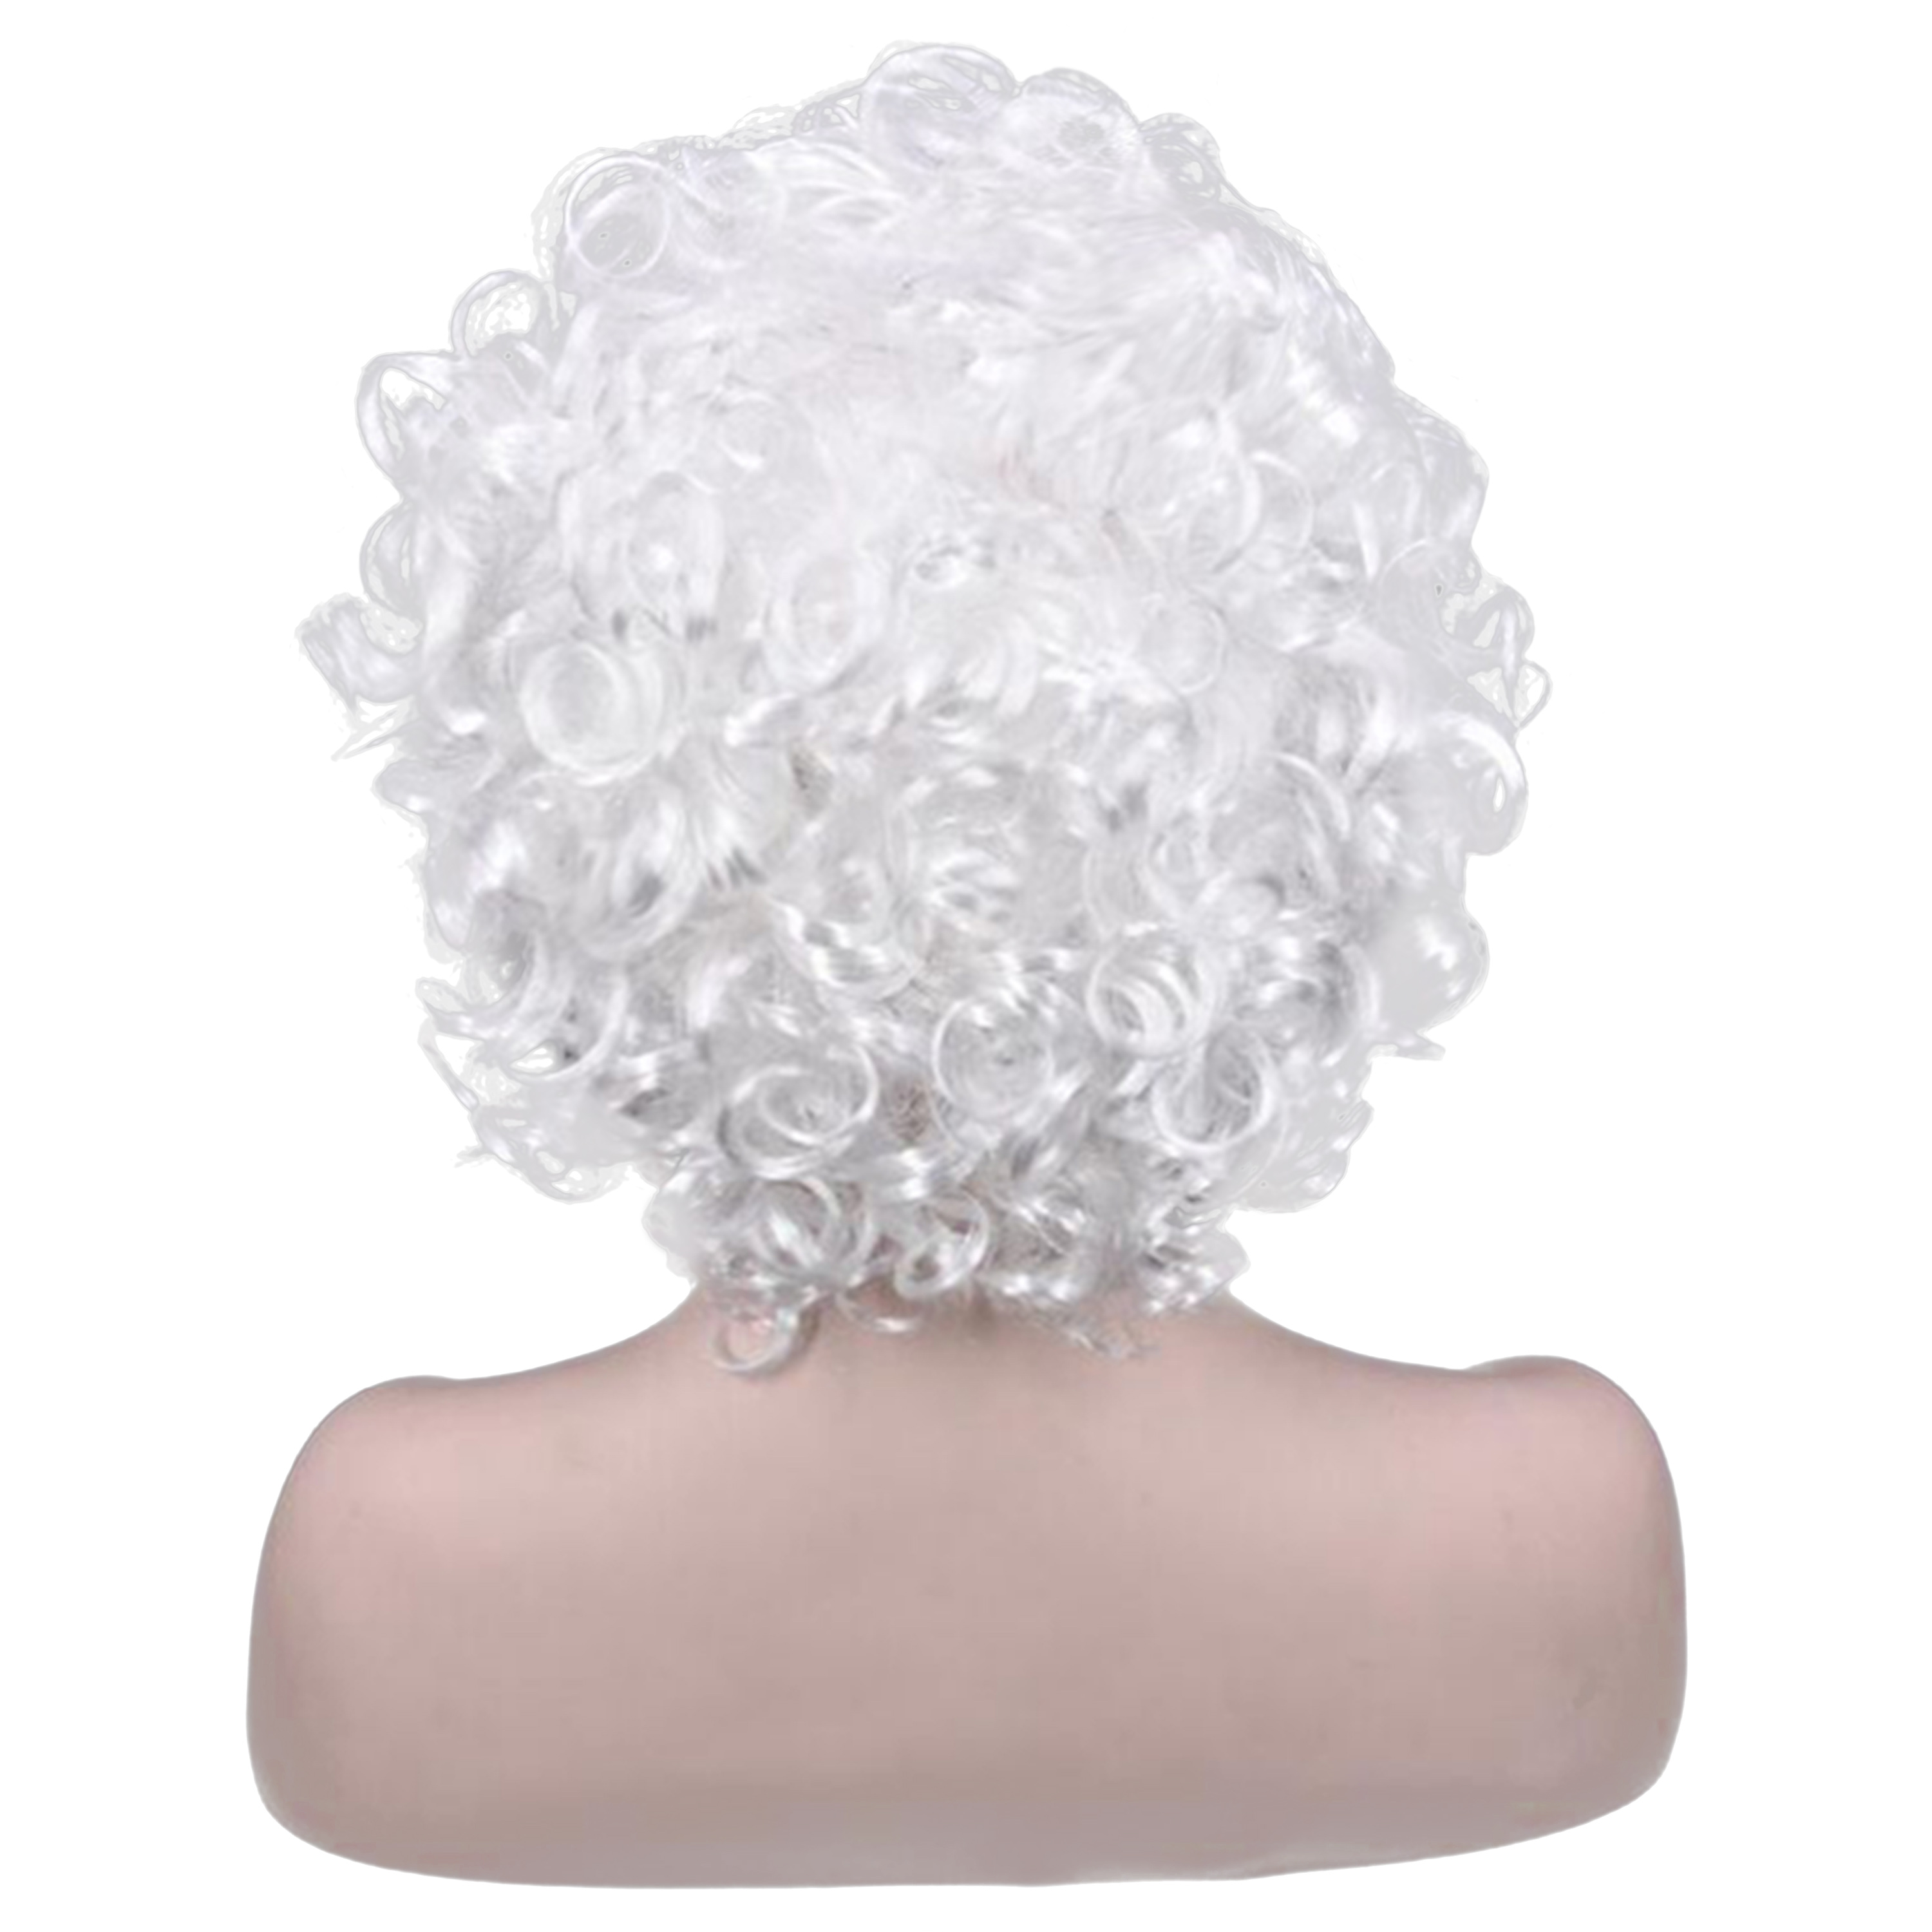 Santa White Synthetic Hair Curly Wigs With Beard Capless Wigs 12 Inches